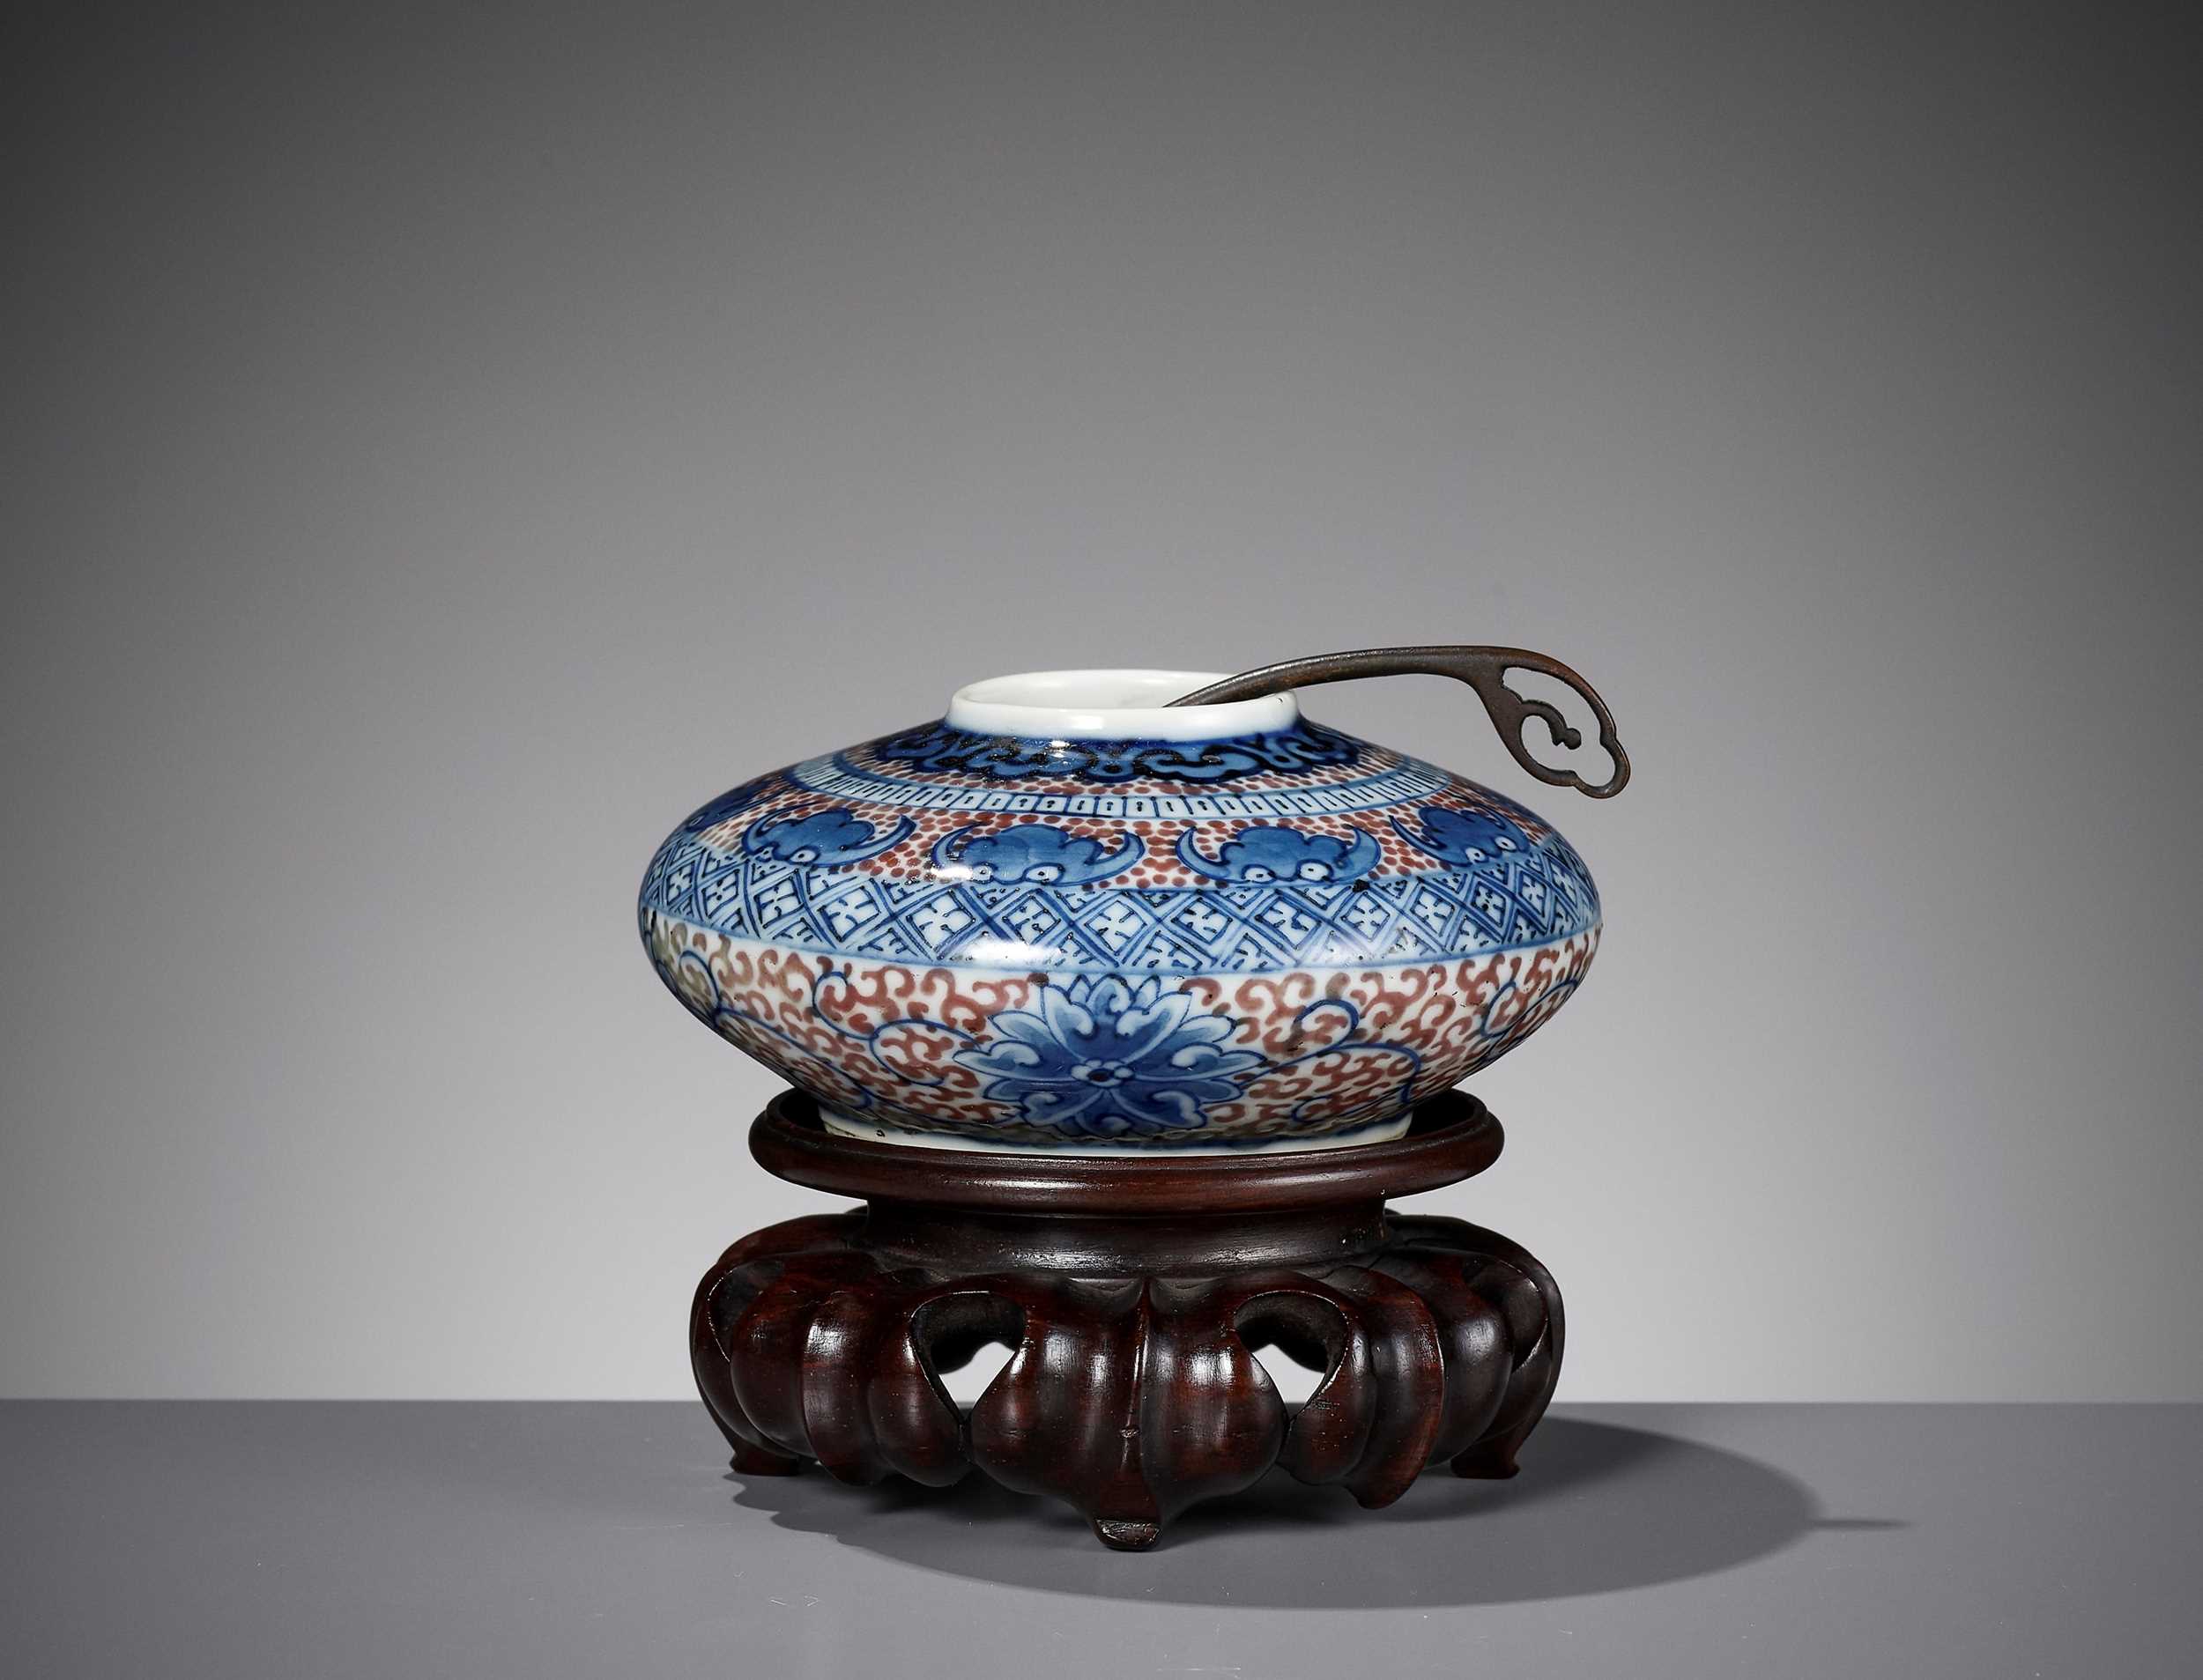 Lot 100 - A PORCELAIN WATER POT, WITH MATCHING BRONZE SPOON AND WOOD STAND, QING DYNASTY